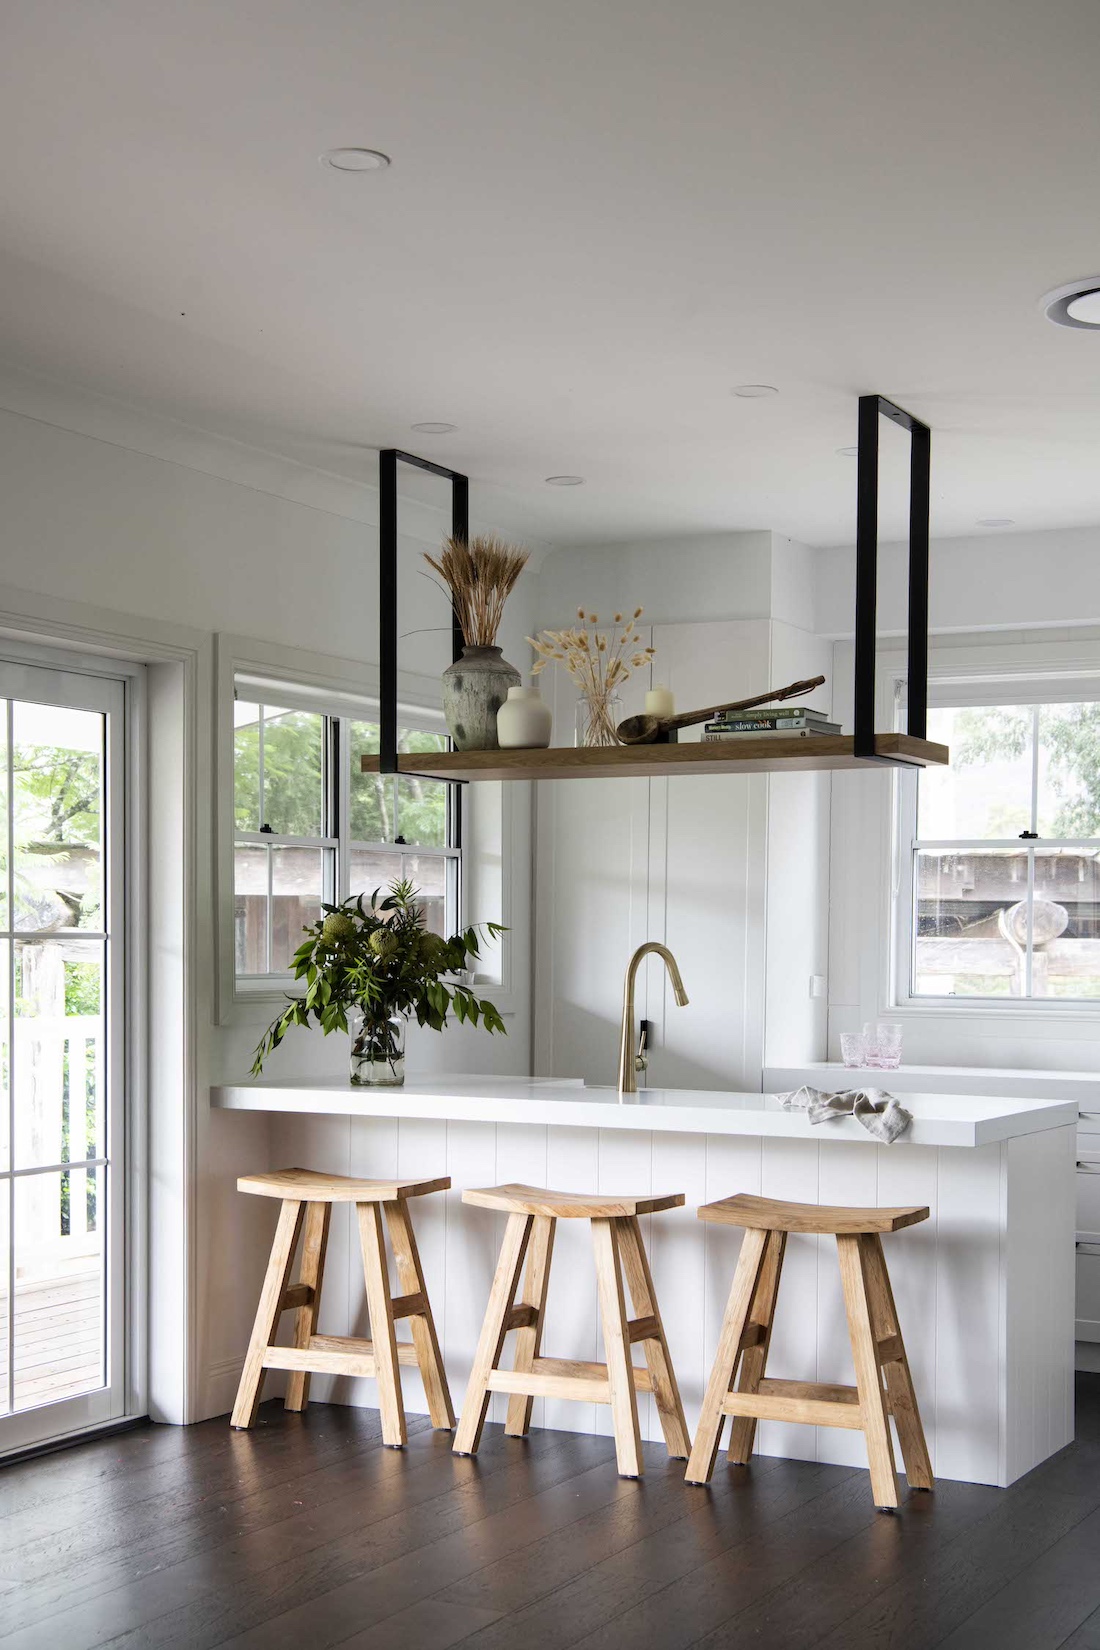 Kitchen with hanging shelf